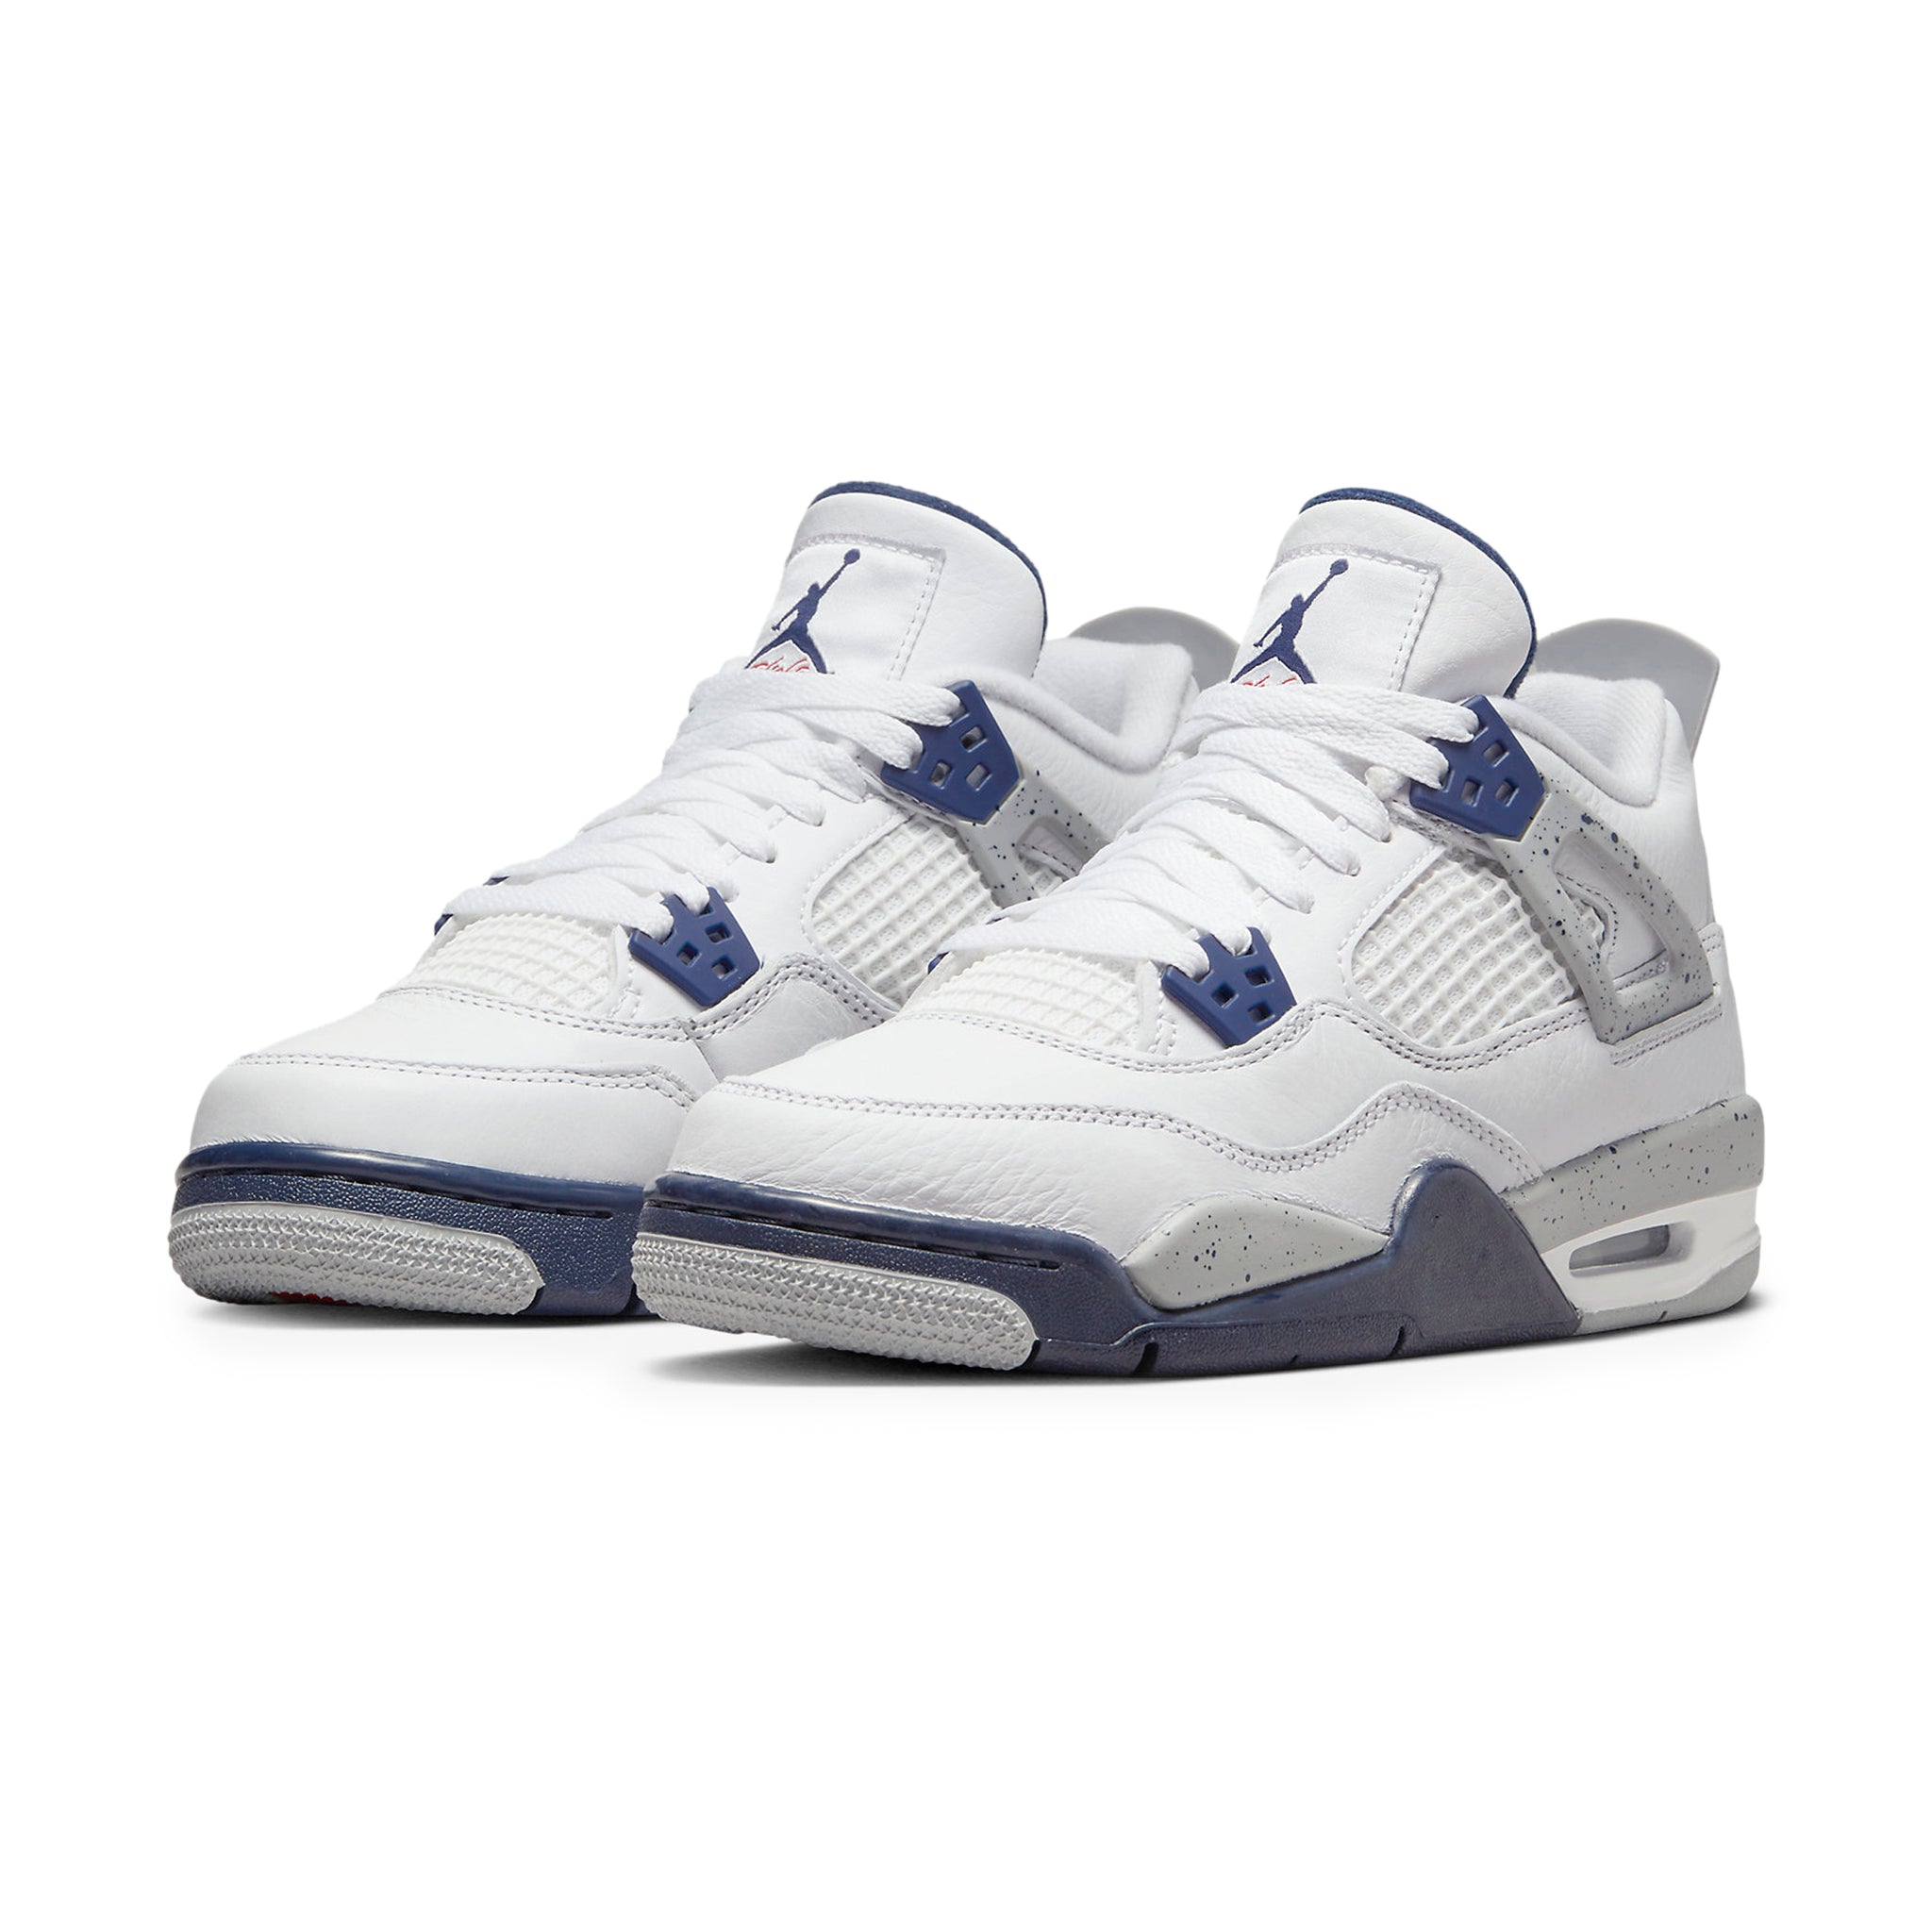 Front side view of Air Jordan 4 Retro Midnight Navy (GS) 408452-140